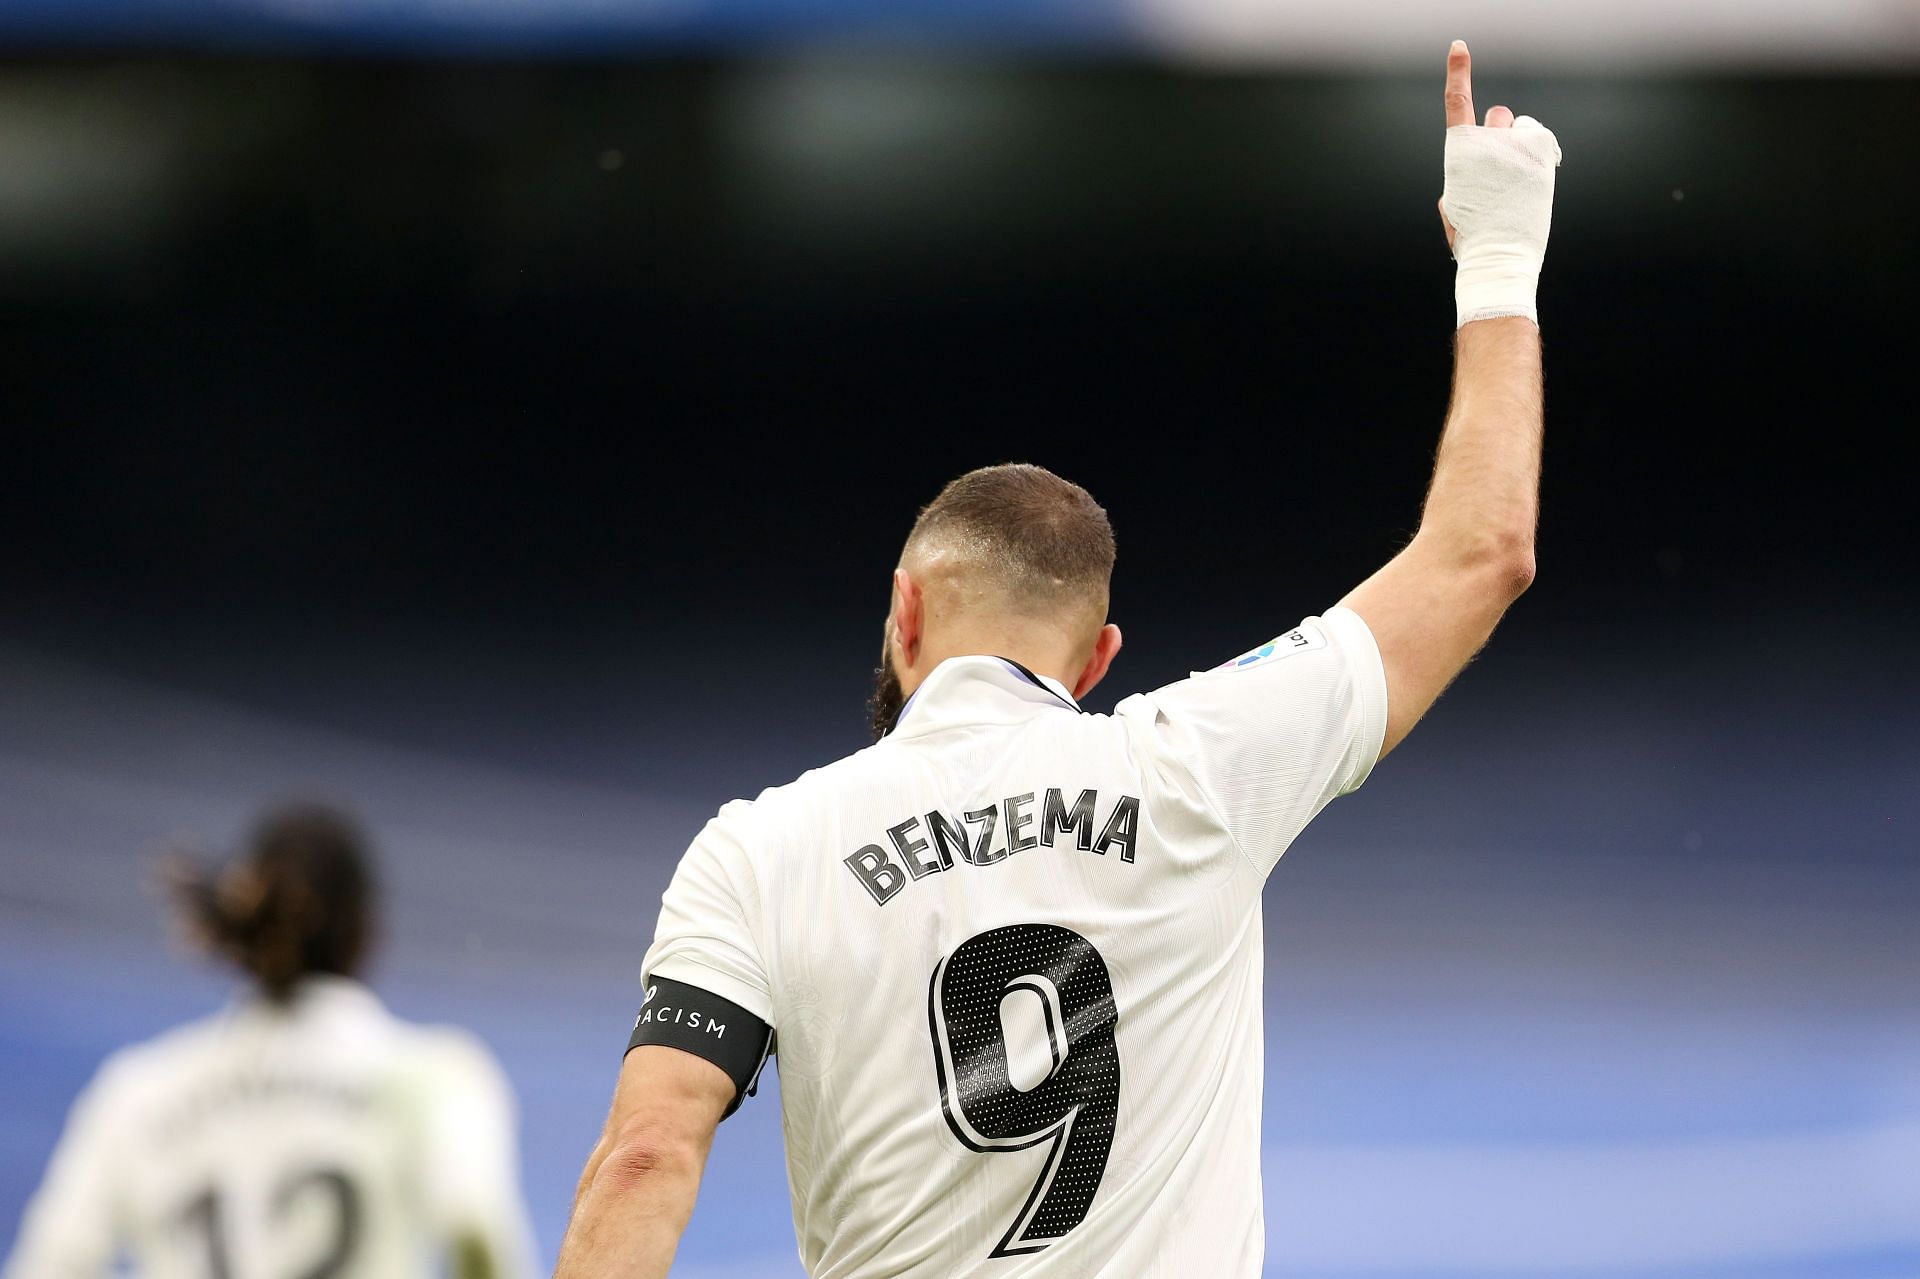 Karim Benzema decided to leave Real Madrid after 14 seasons Jude Bellingham is the new addition to the Real Madrid locker room